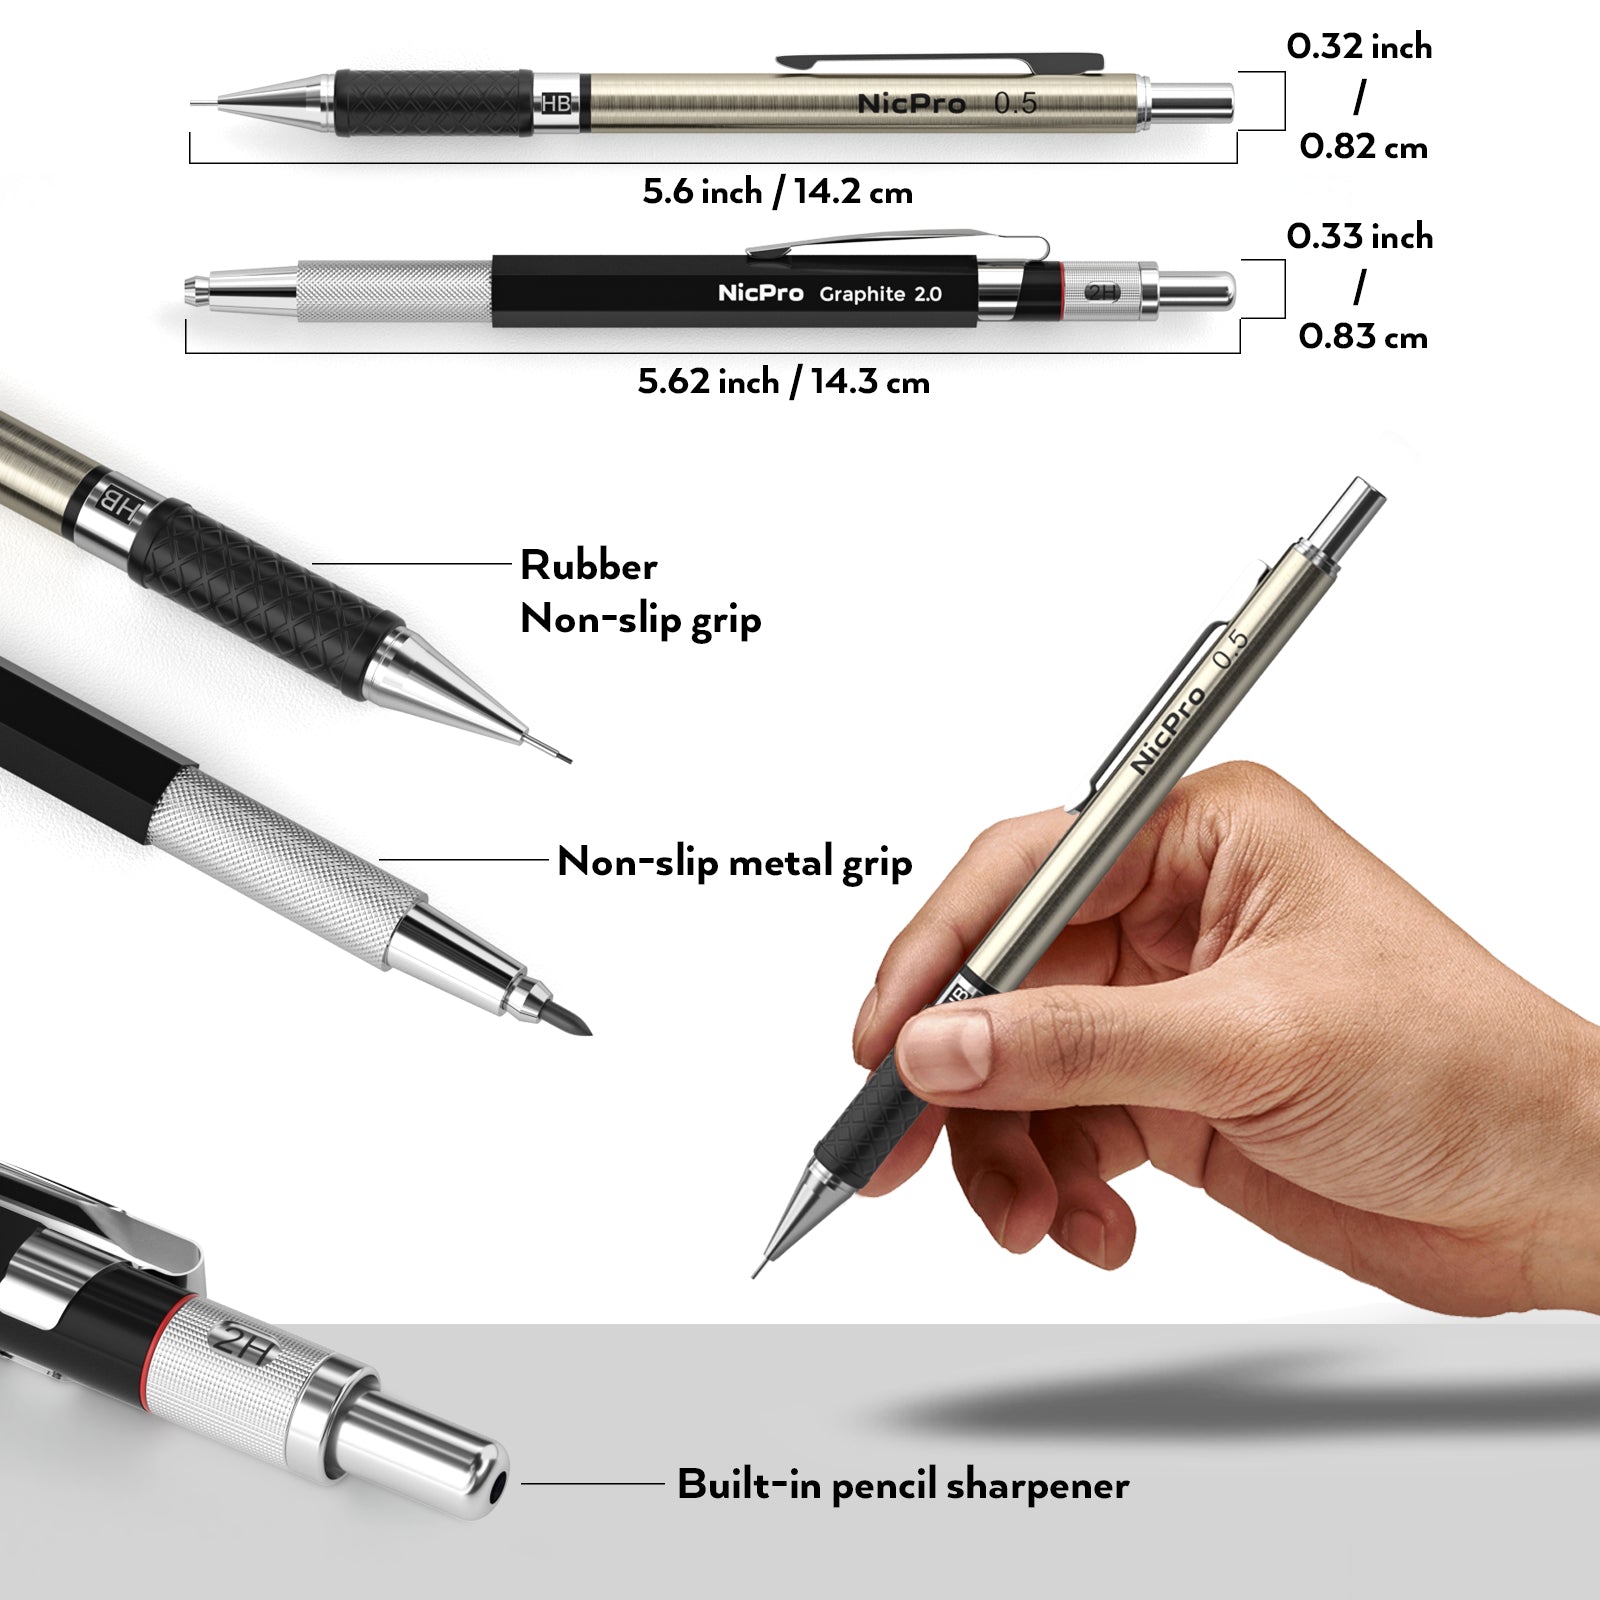 Nicpro 6Pcs Art Mechanical Pencils Set, 3 Pcs Metal Drafting Pencil 0.5mm & 0.7mm & 0.9mm and 3 Pcs 2mm Graphite Lead Holder (2B HB 2H) with 12 Tubes Lead Refills